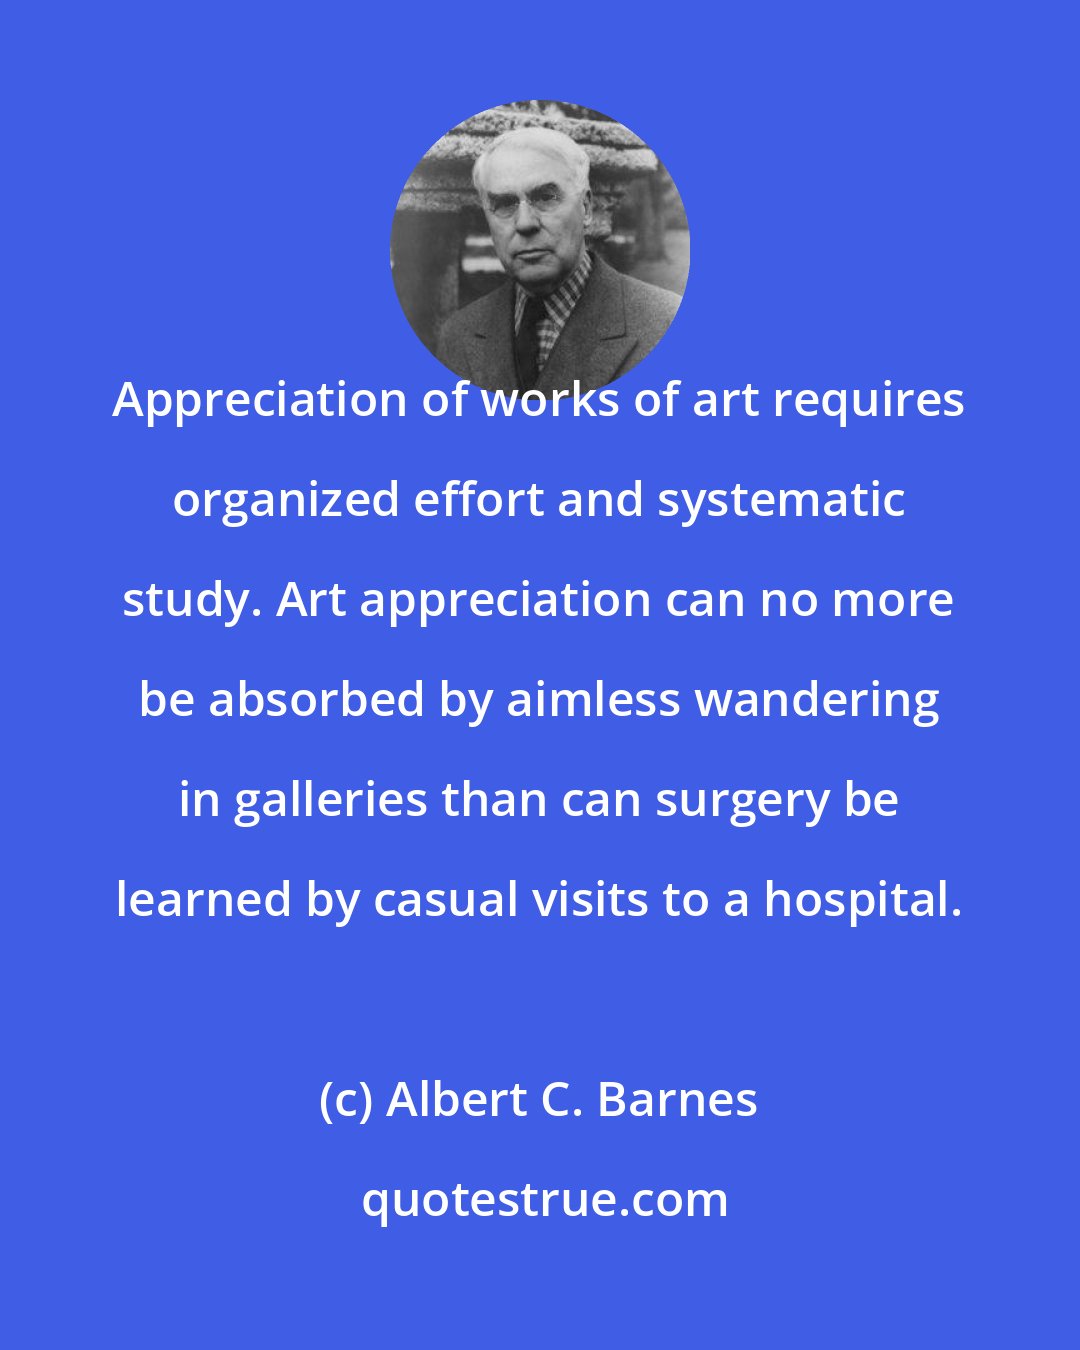 Albert C. Barnes: Appreciation of works of art requires organized effort and systematic study. Art appreciation can no more be absorbed by aimless wandering in galleries than can surgery be learned by casual visits to a hospital.